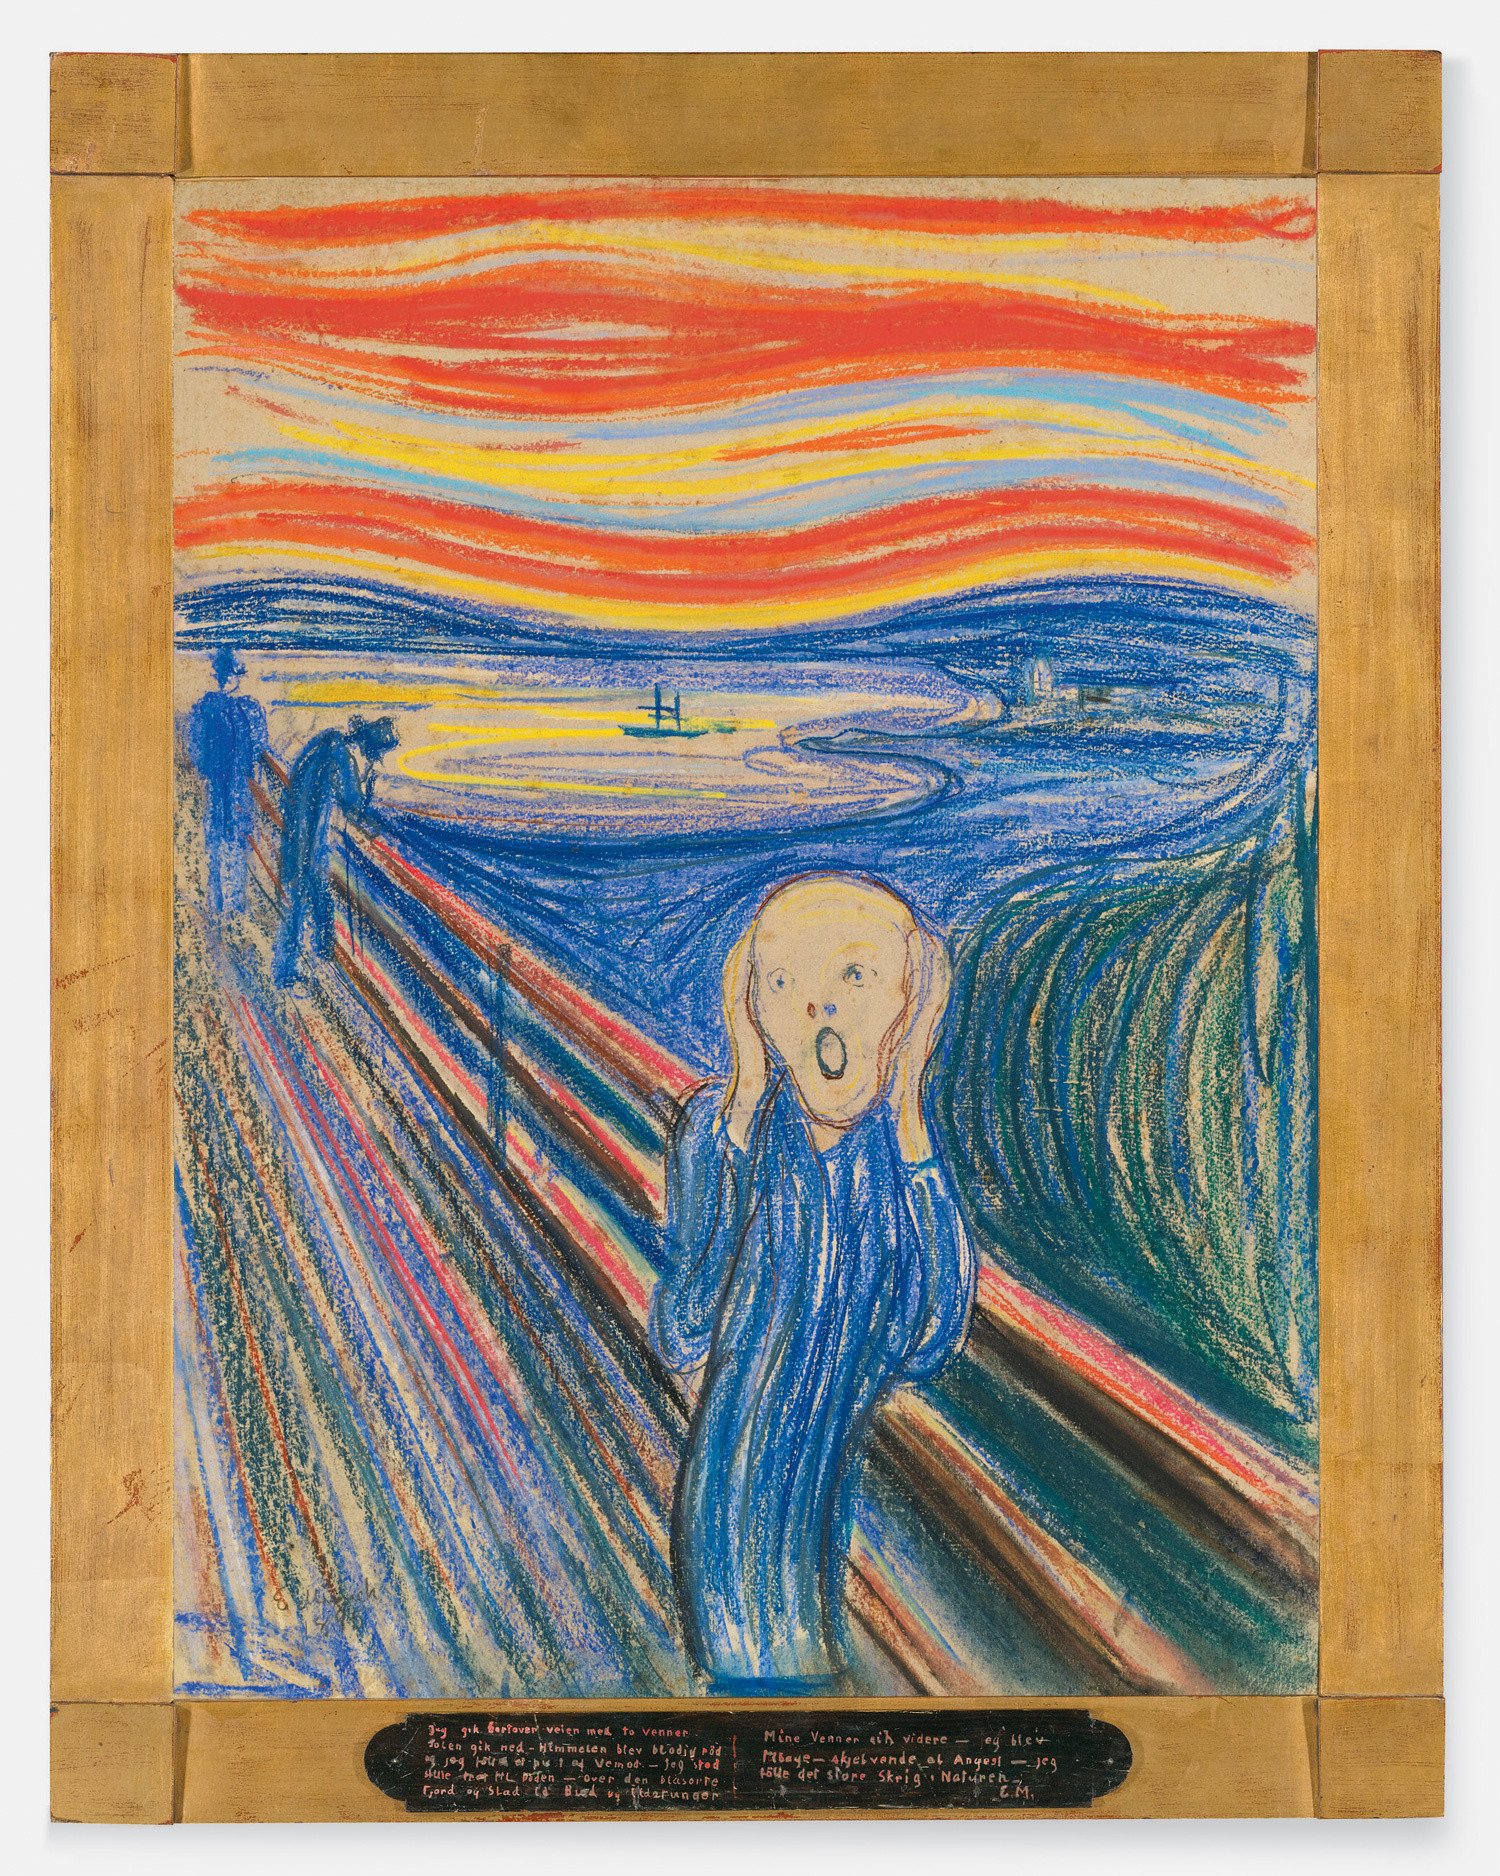 Edvard Munch. _The Scream._ Pastel on board. 1895. © 2012 The Munch Museum/The Munch-Ellingsen Group/Artists Rights Society (ARS), New York